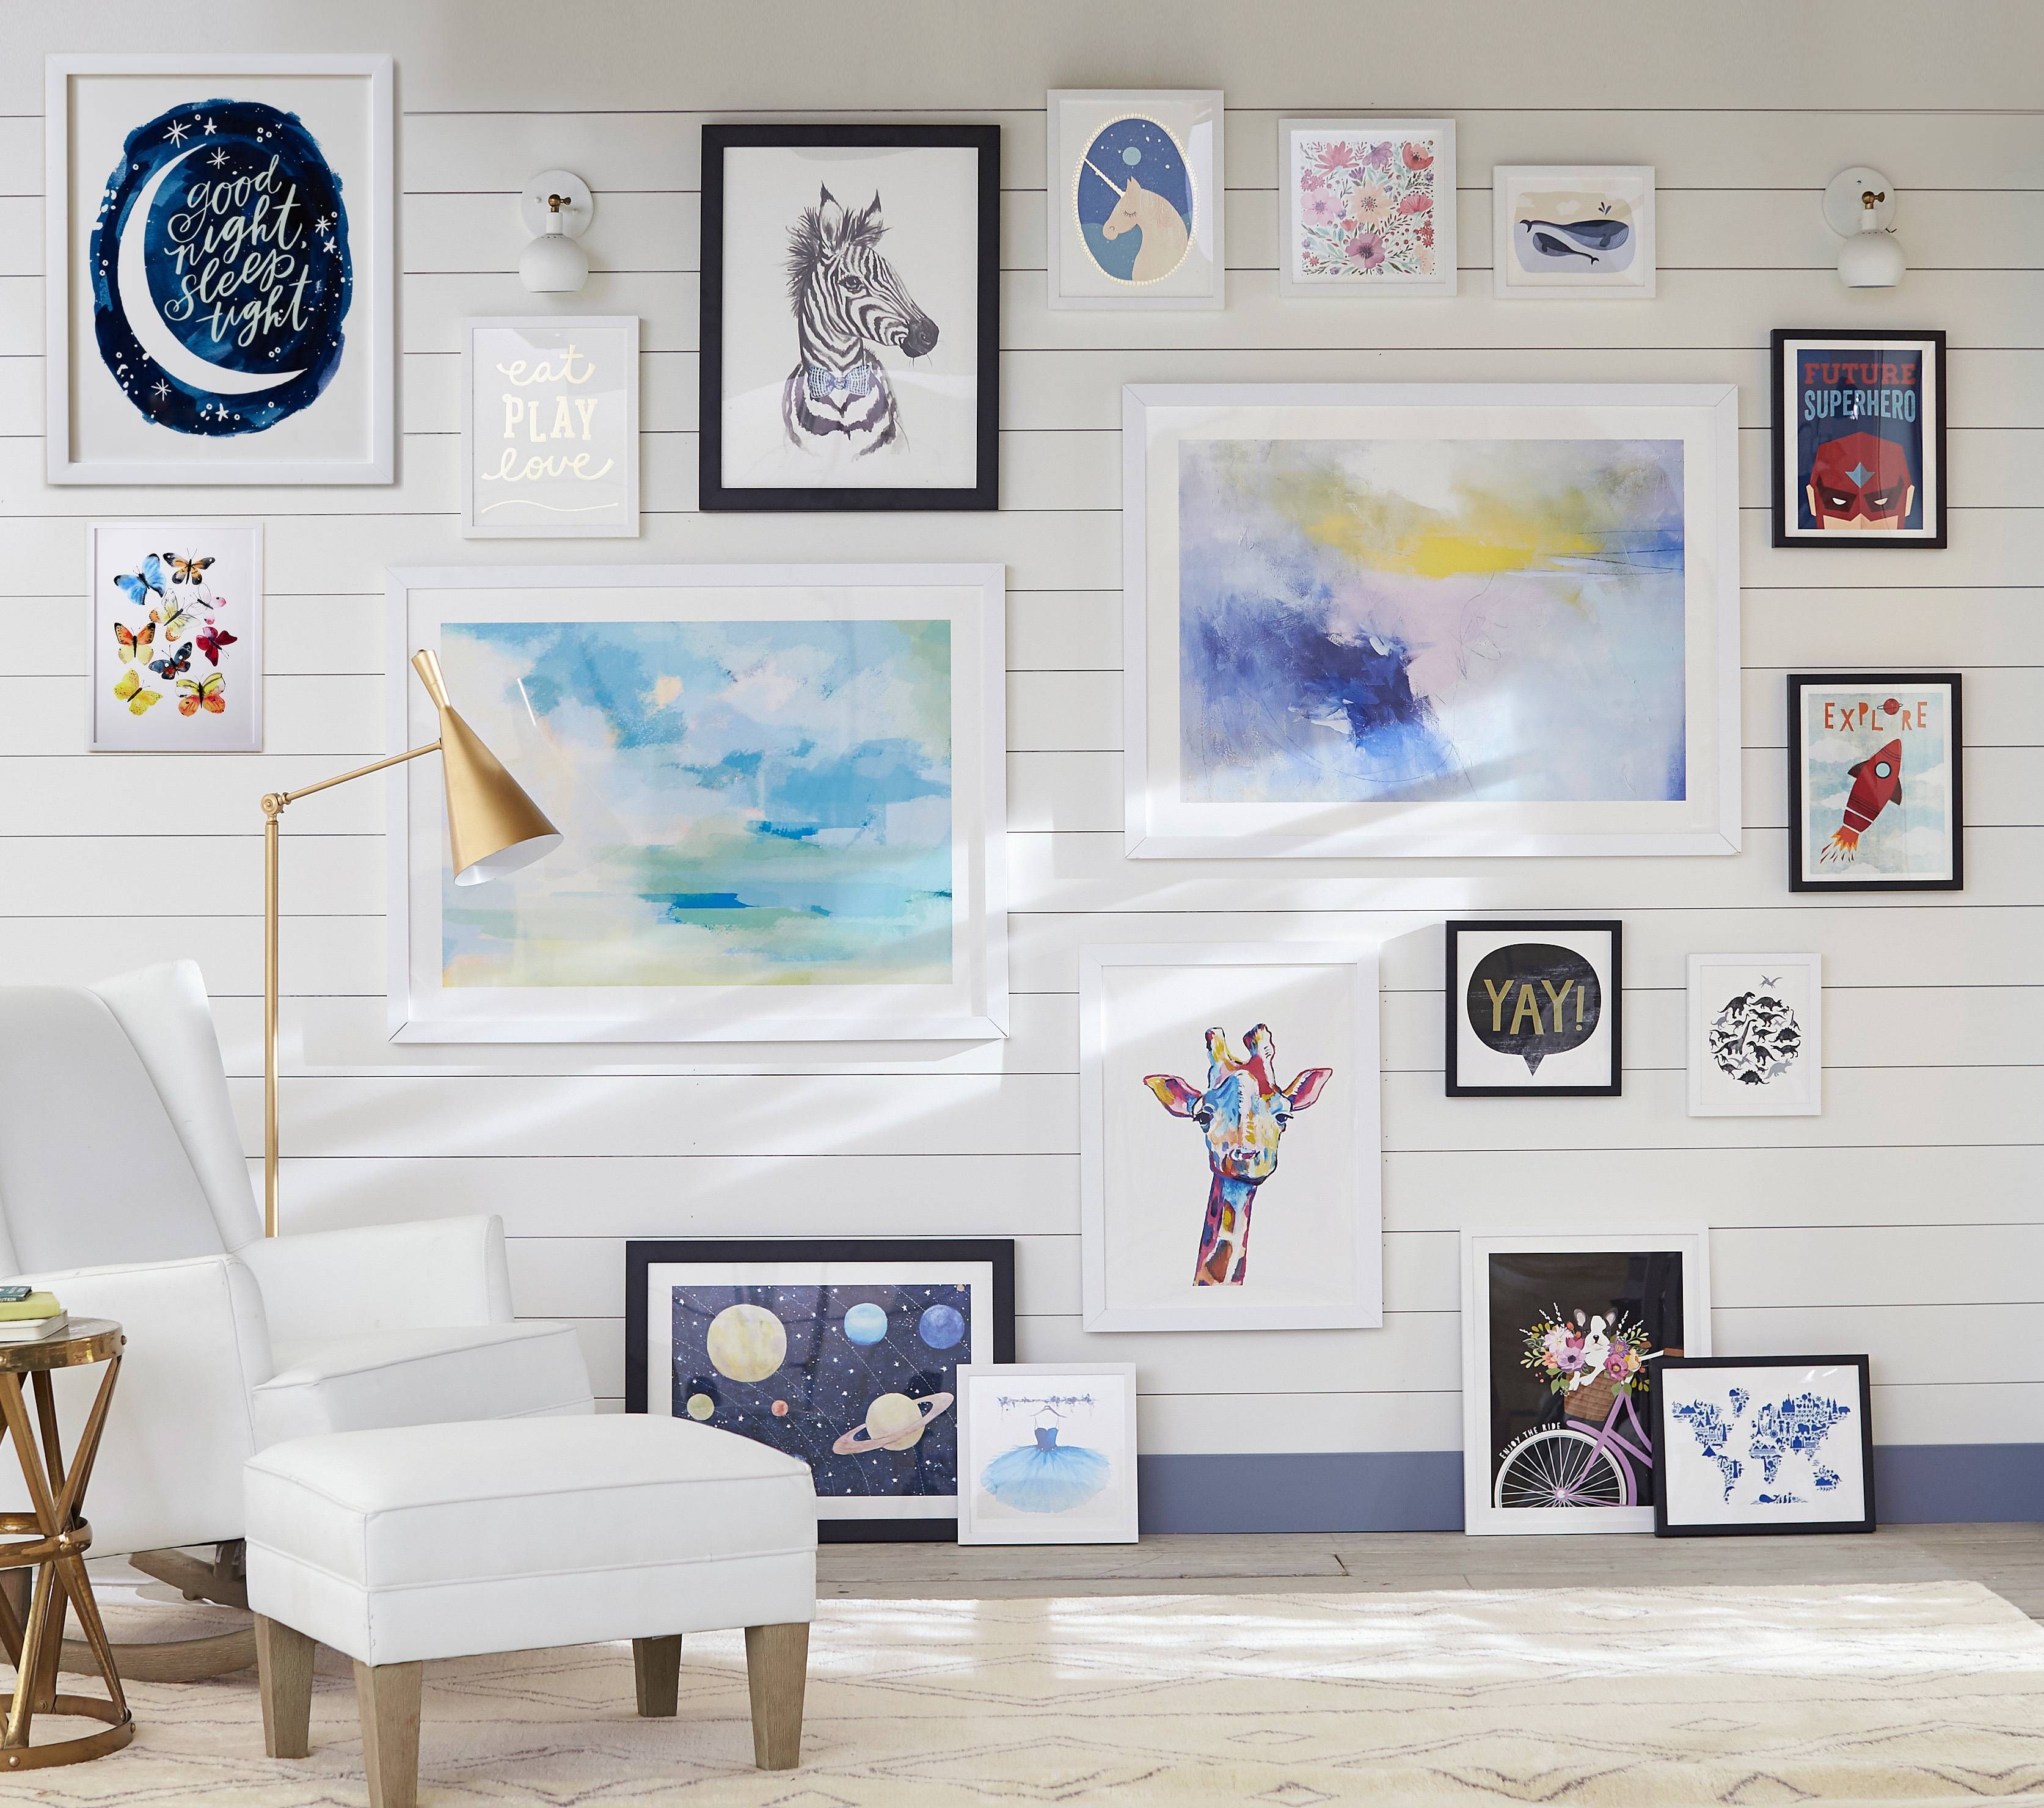 Pottery Barn Kids And Pbteen Debut Exclusive Wall Art Collection Inside Most Popular Exclusive Wall Art (View 4 of 20)